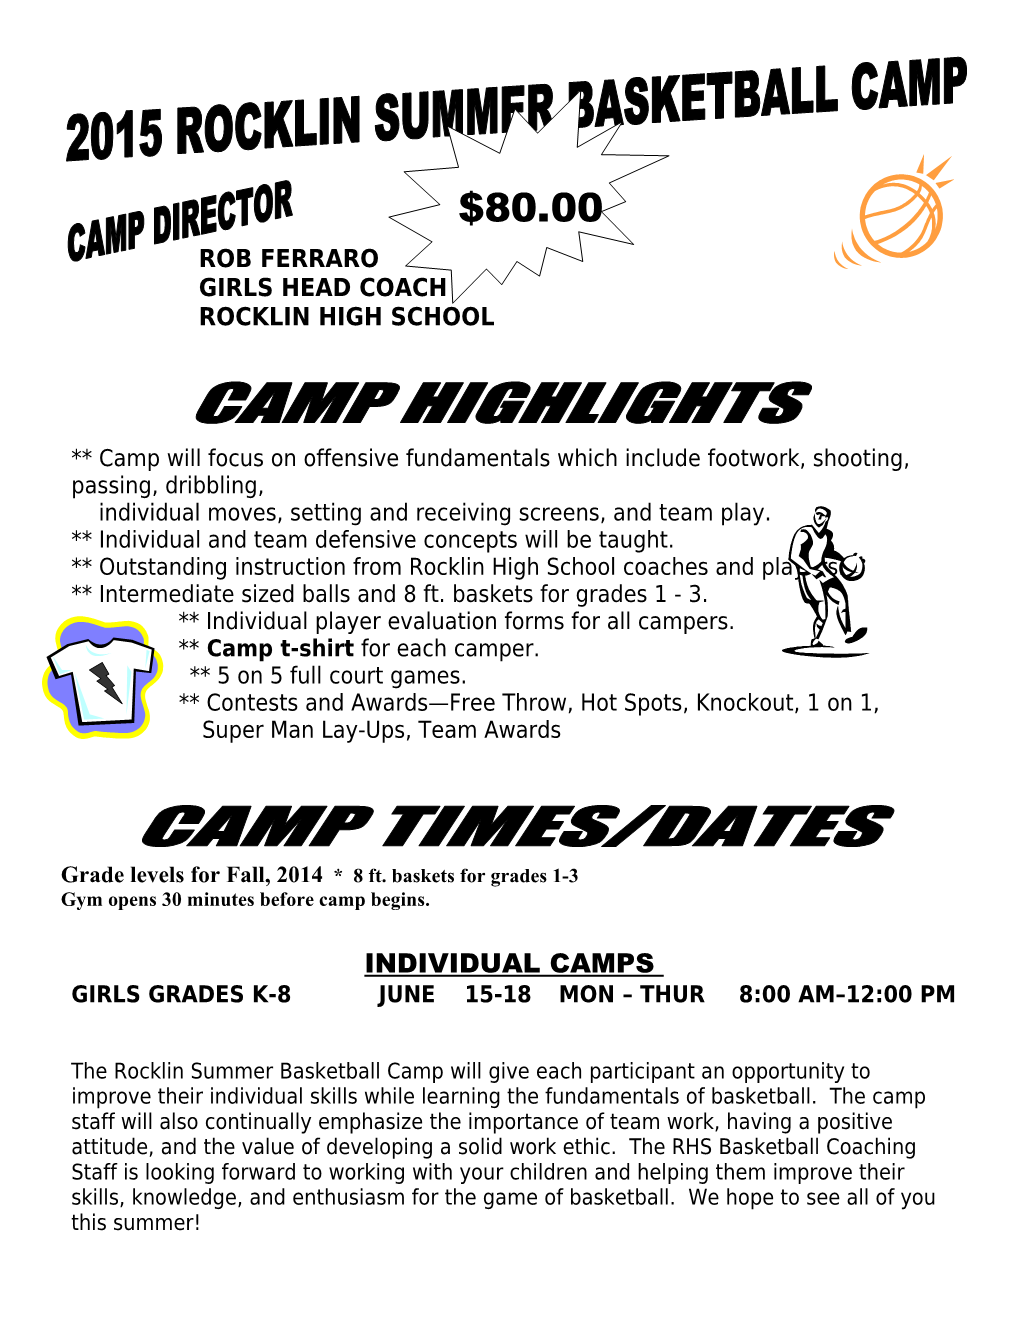 Camp Will Focus on Offensive Fundamentals Which Include Footwork, Shooting, Passing, Dribbling